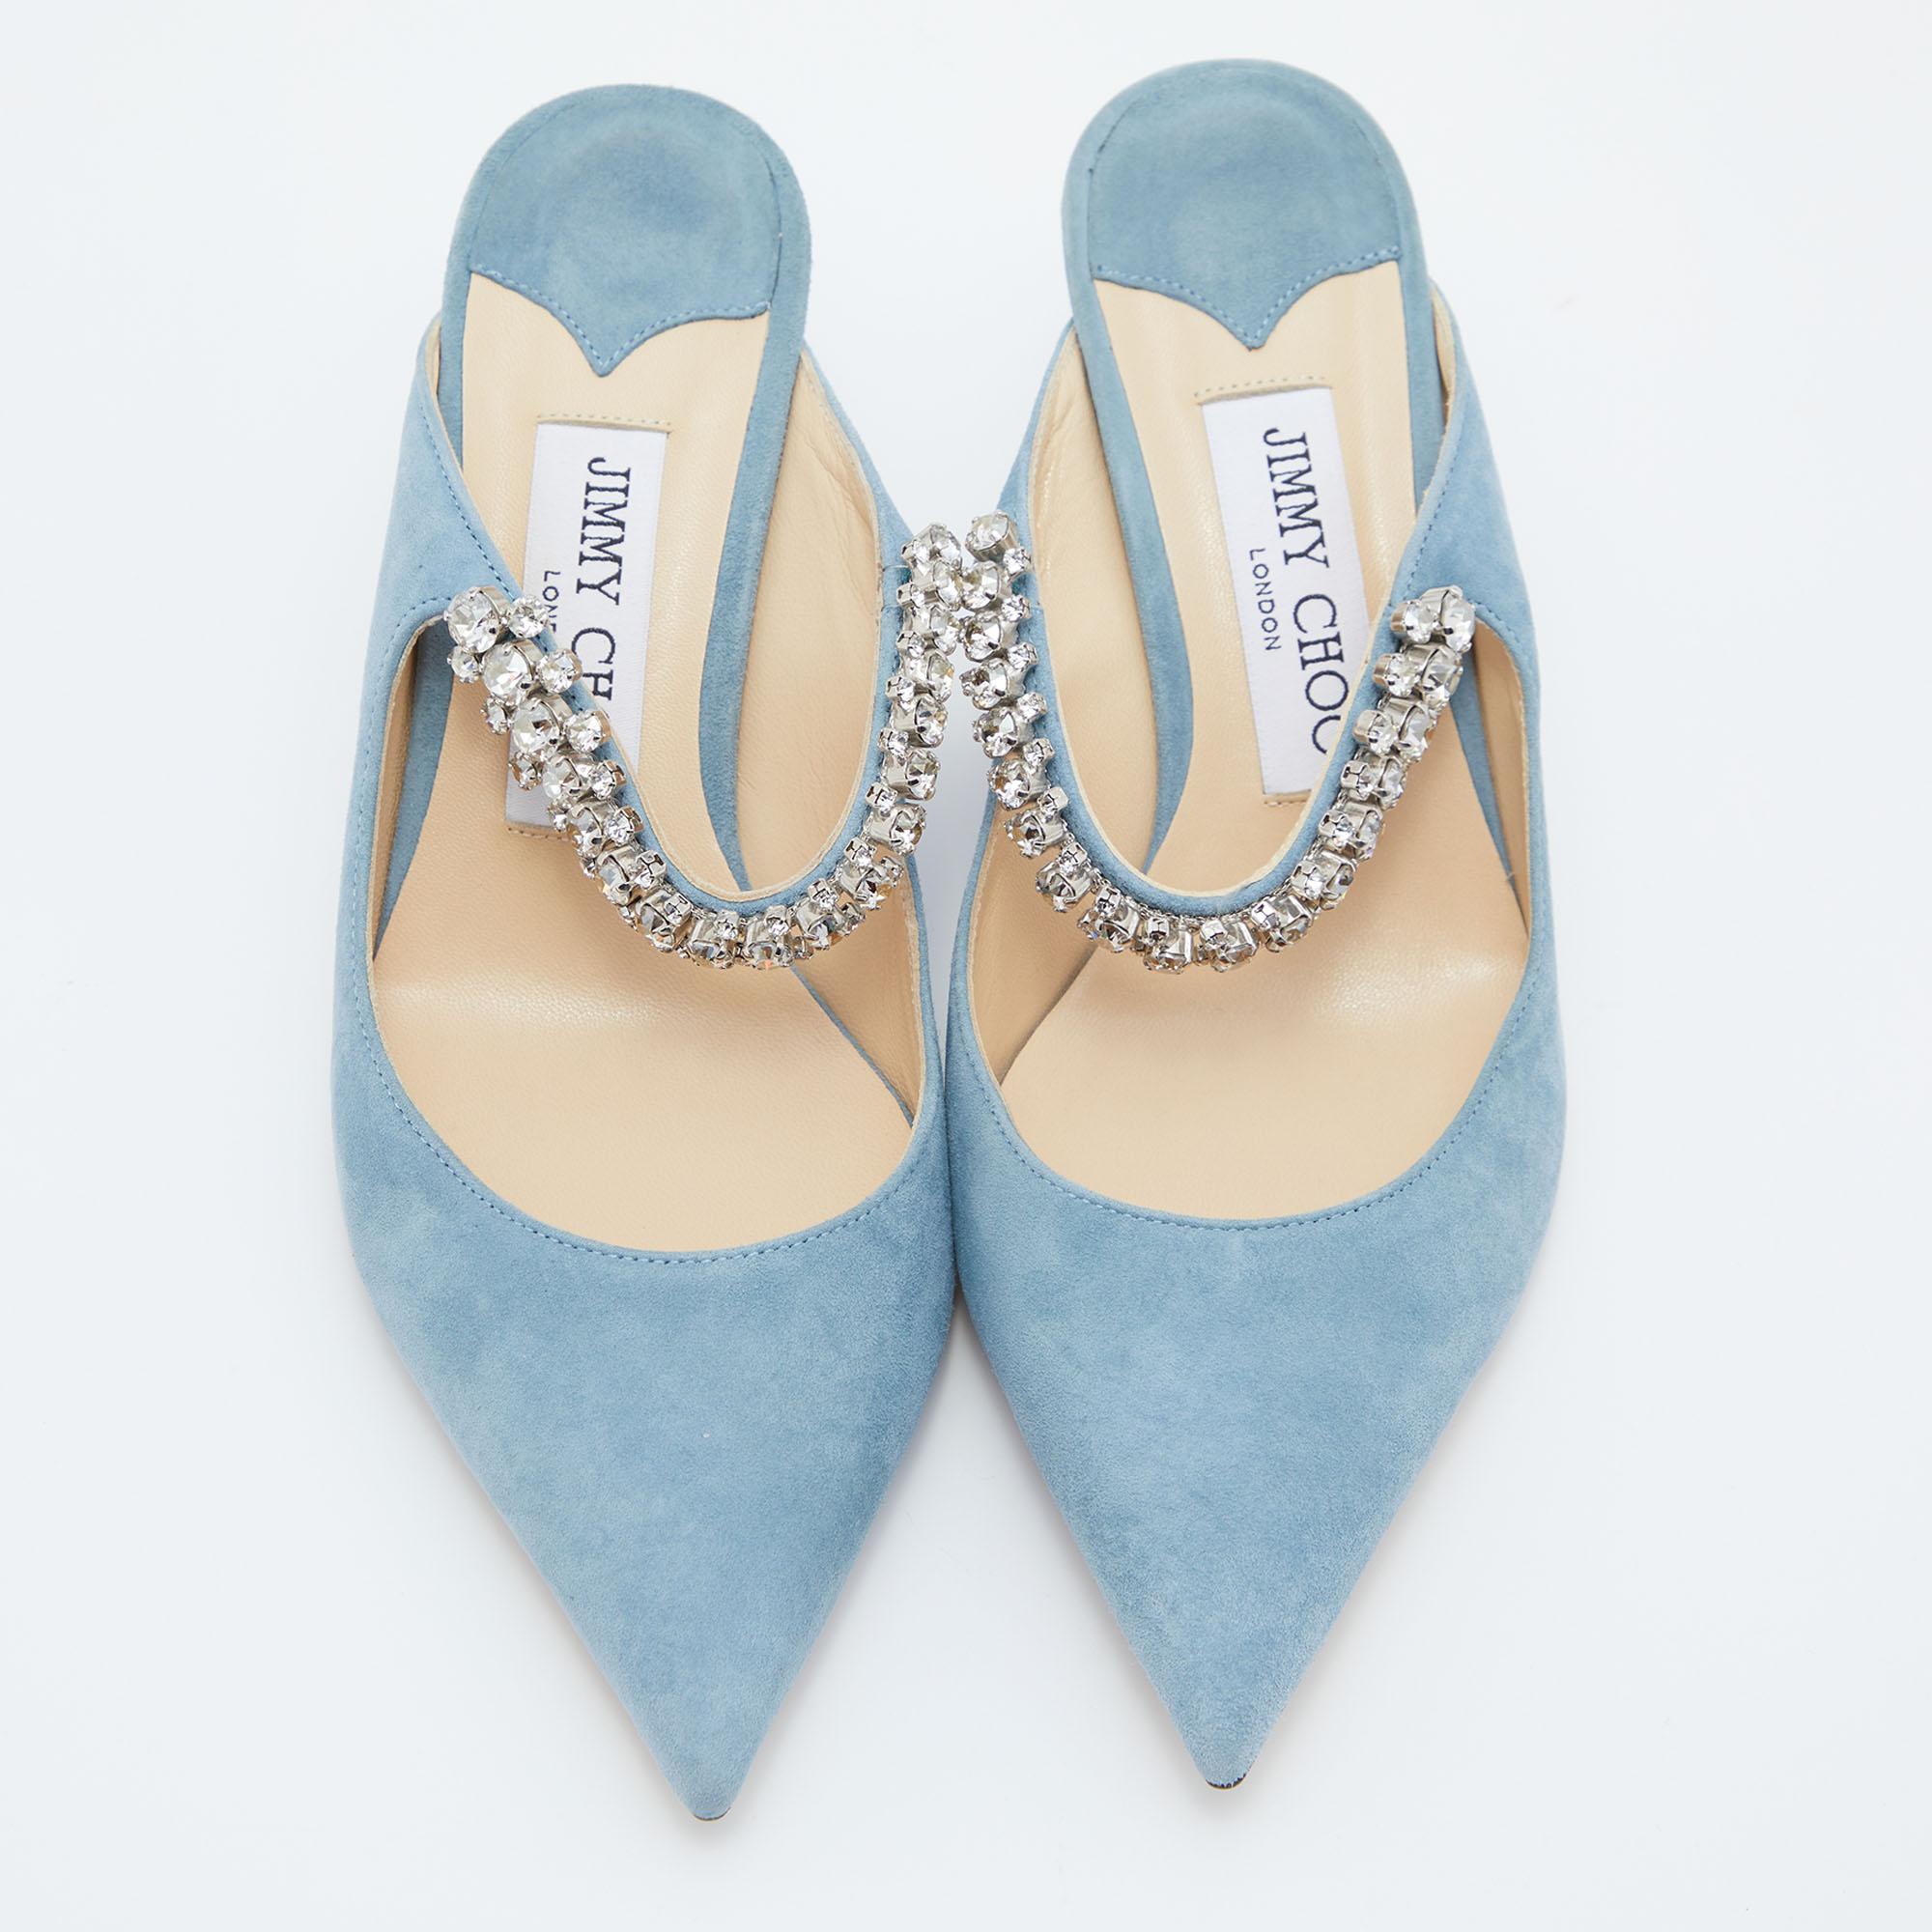 Jimmy Choo Blue Suede Bing Crystal Embellished Pointed Toe Mules Size 36 1